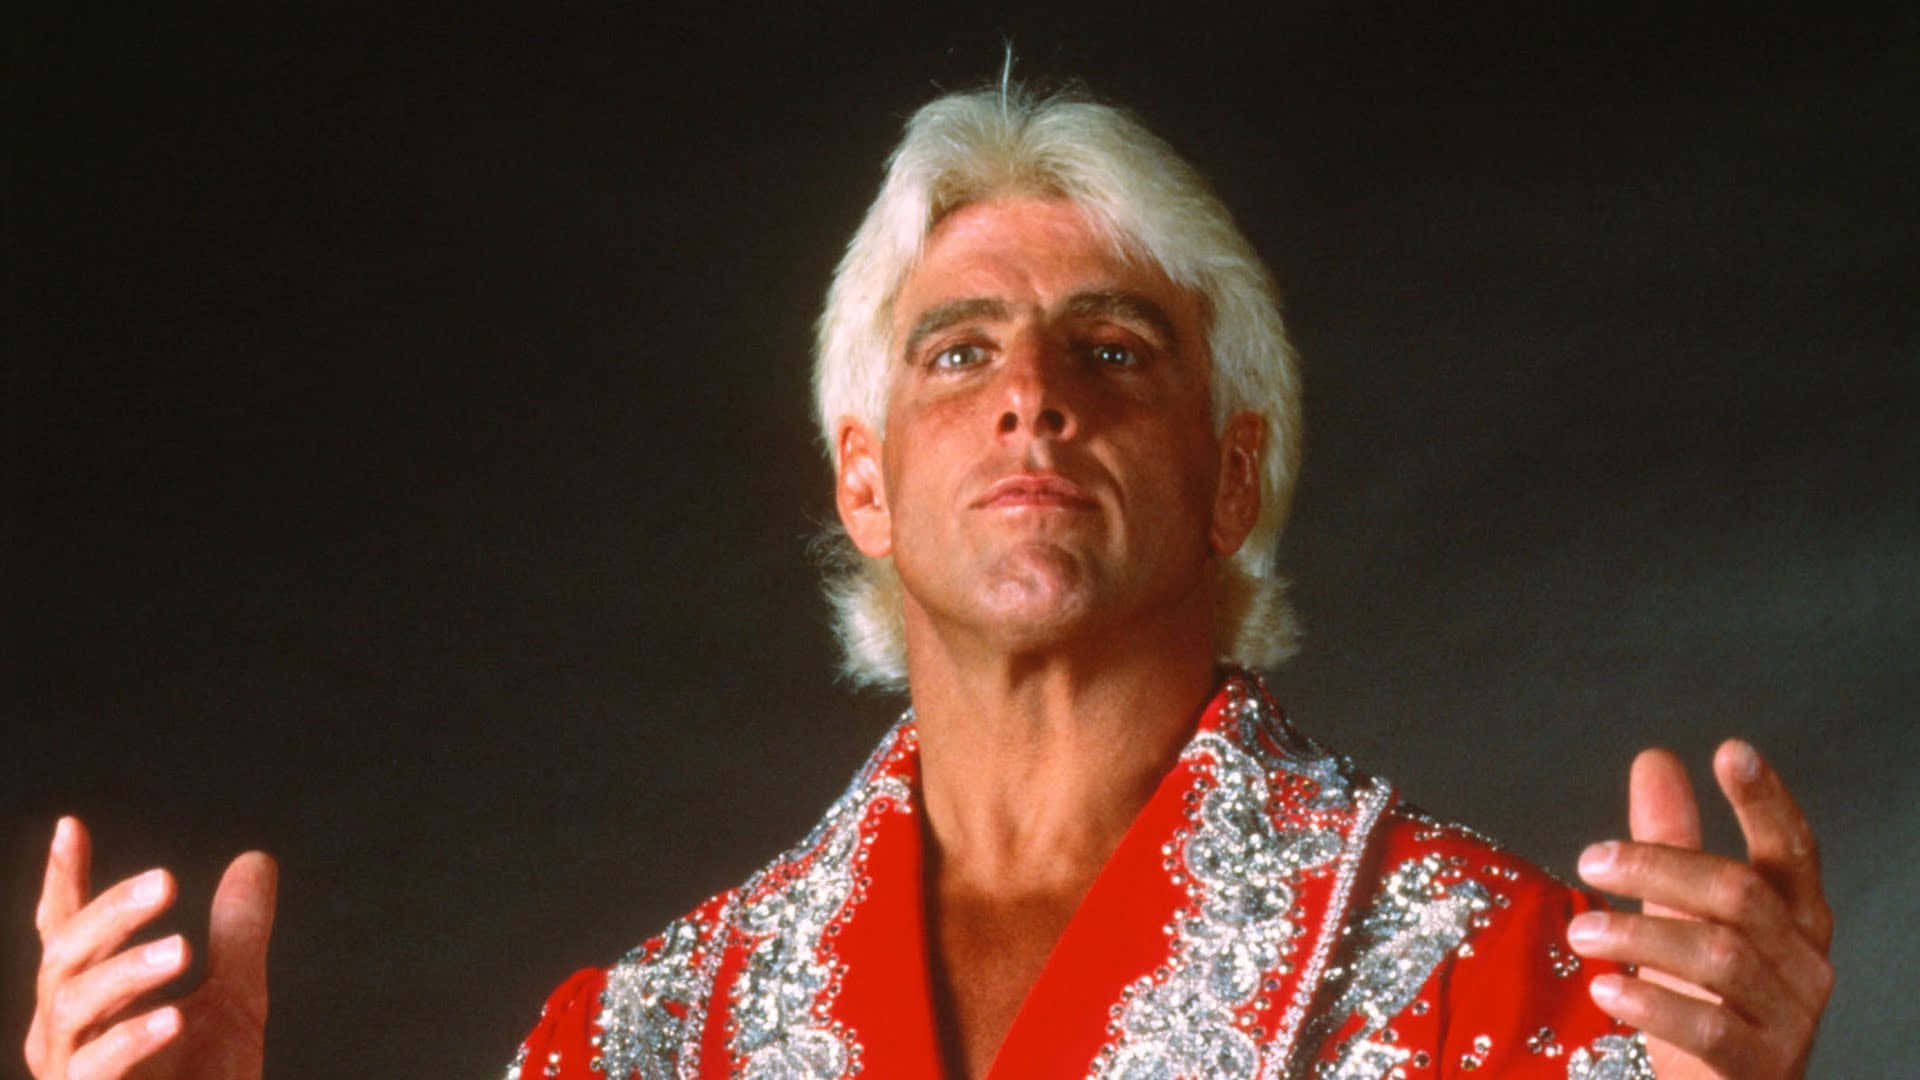 Ric Flair Wearing Red And Silver Robe